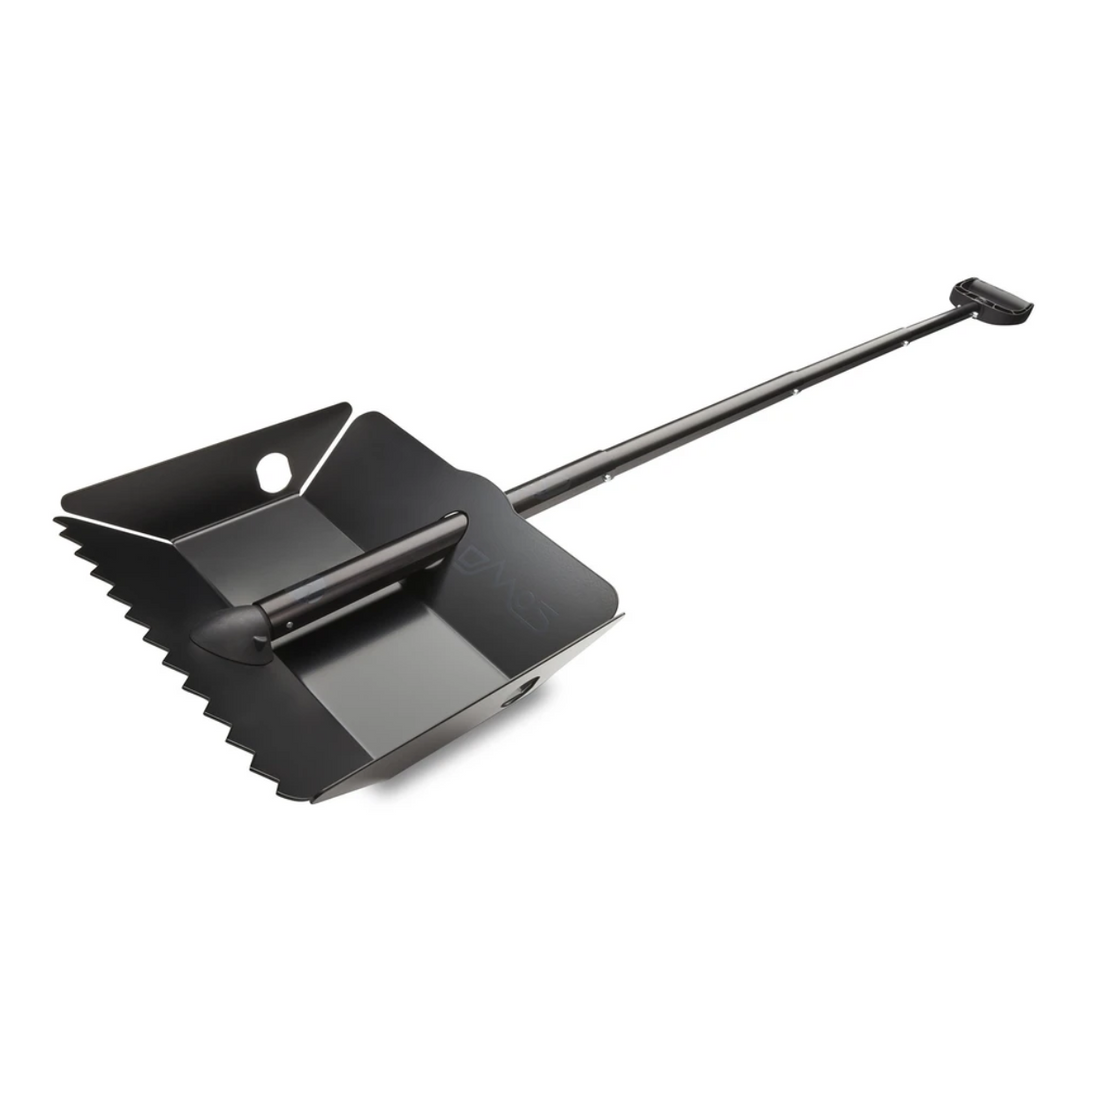 THE ALPHA EXPEDITION SHOVEL™